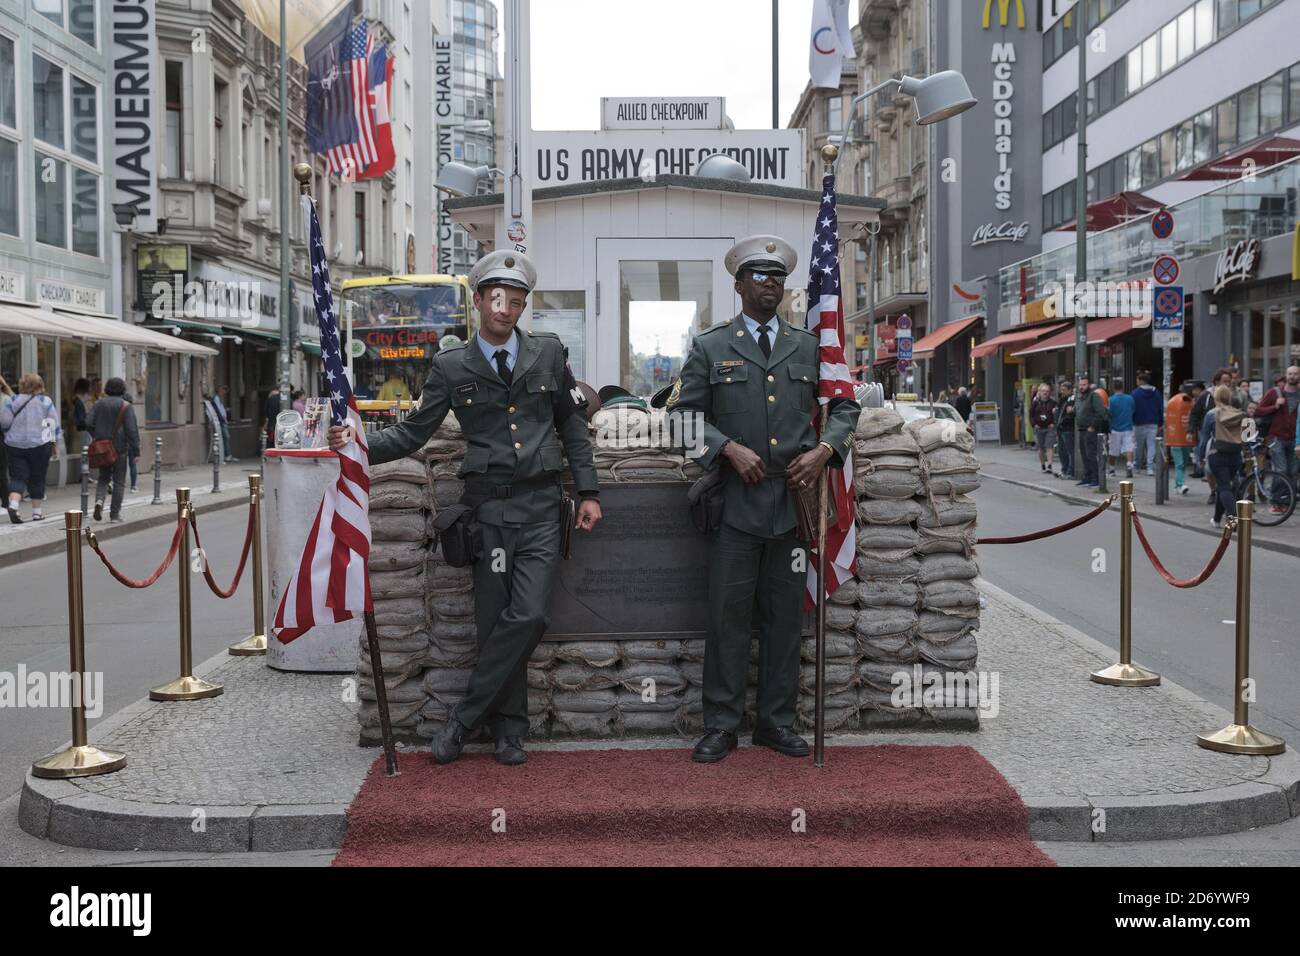 Berlin, Germany - July 13, 2017: Checkpoint Charlie in Berlin, Germany. It was the former border crossing between the West and East Berlin during the Stock Photo